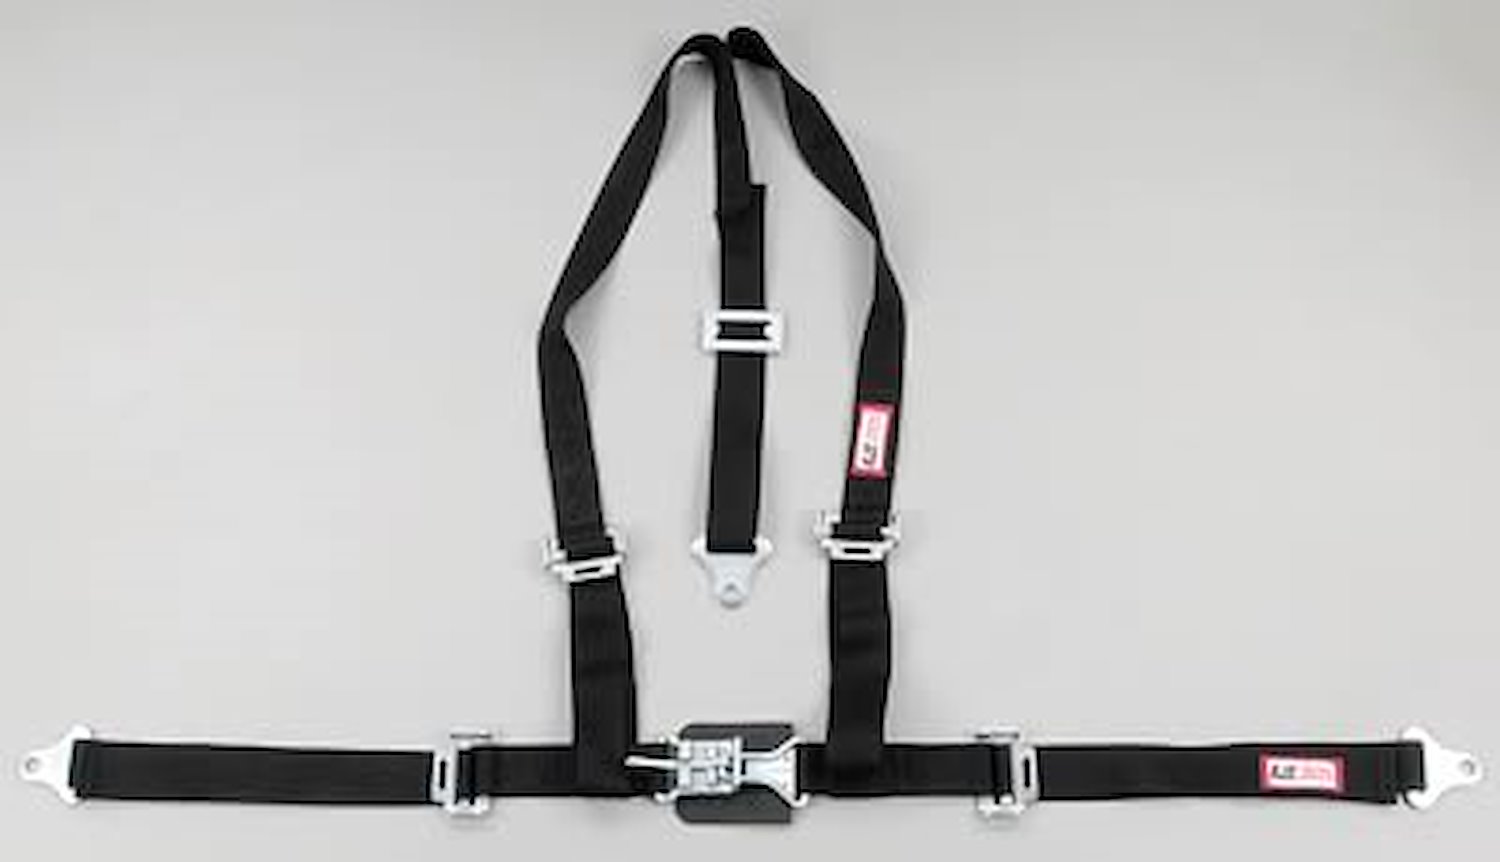 NON-SFI L&L HARNESS 3 PULL UP Lap BELT SEWN IN 2 S.H. Y FLOOR Mount w/STERNUM STRAP ALL WRAP ENDS ORANGE